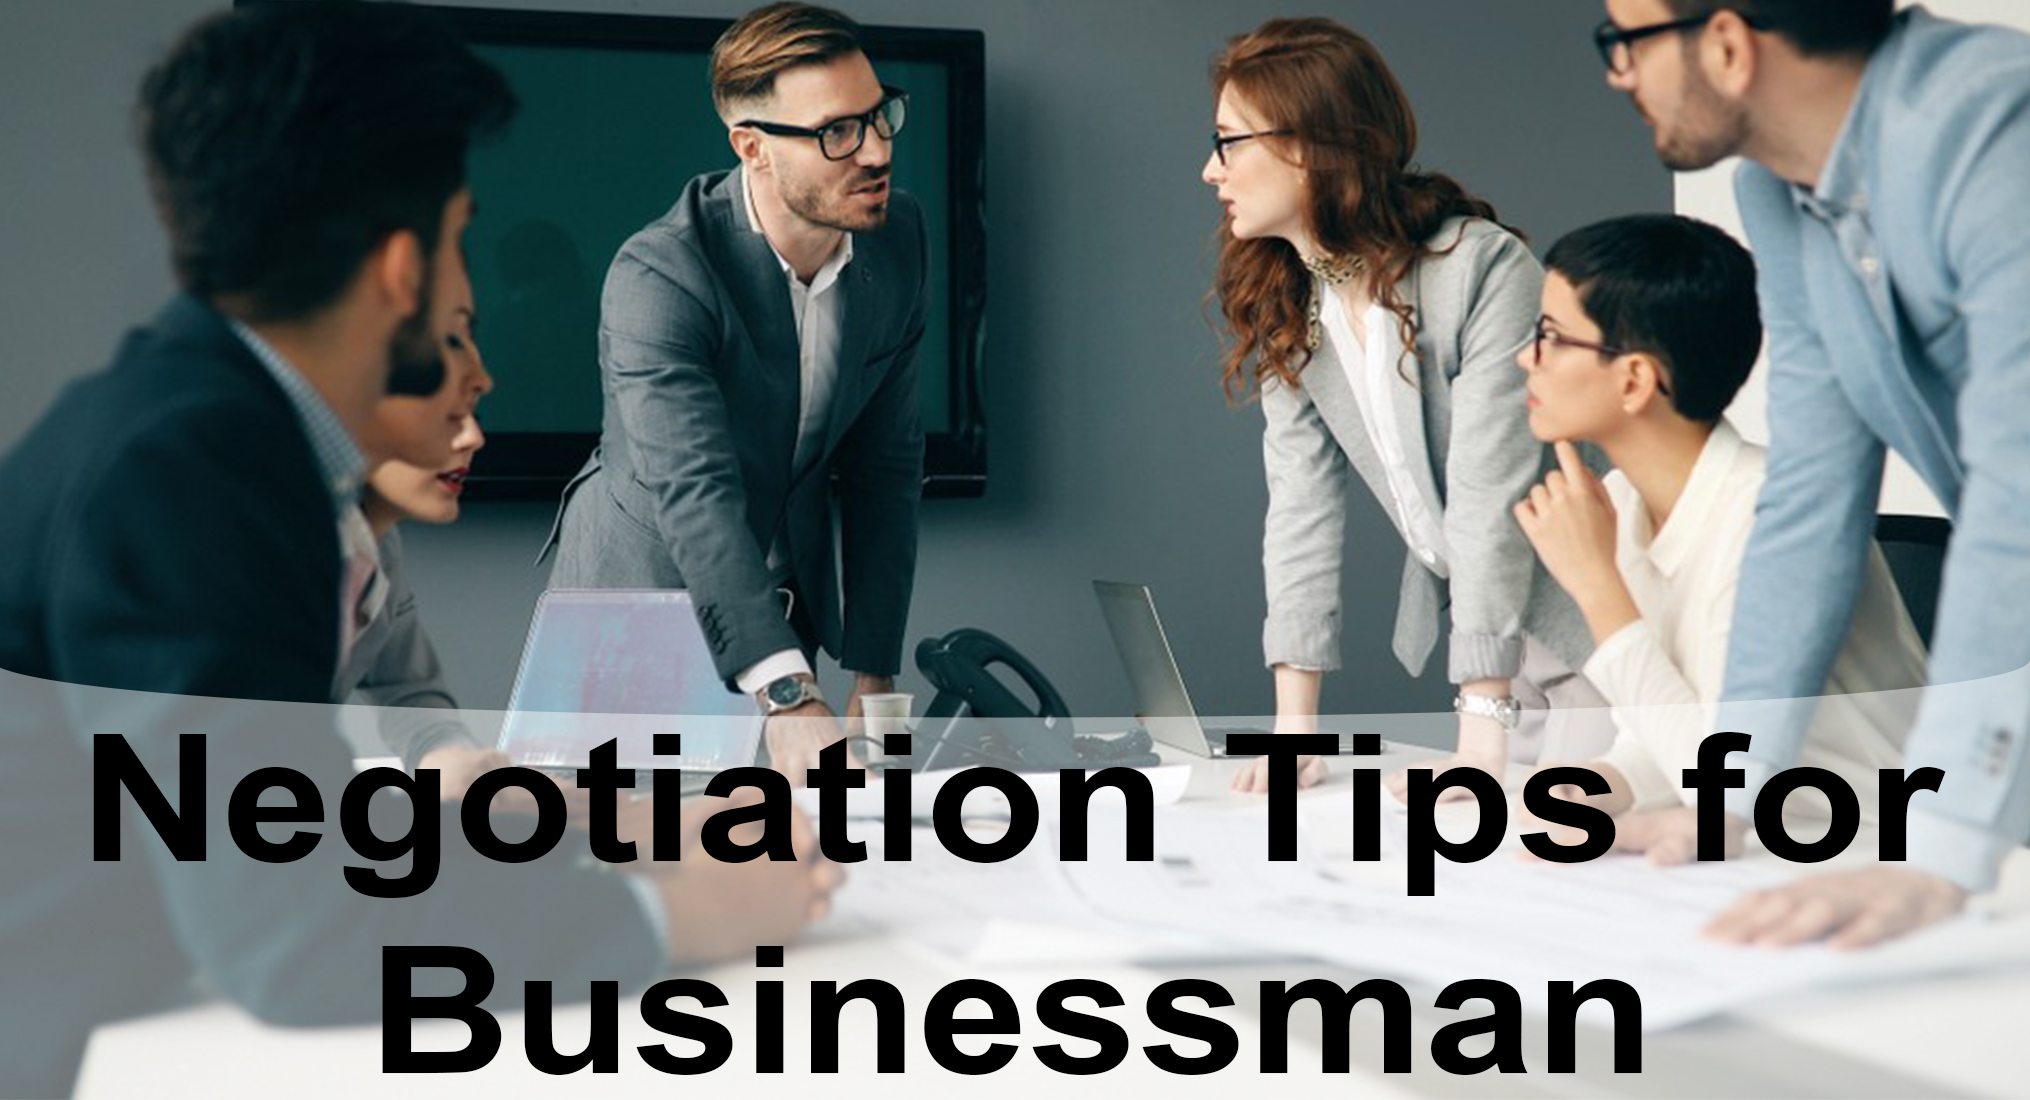 Successful Negotiation Tips for Businessman